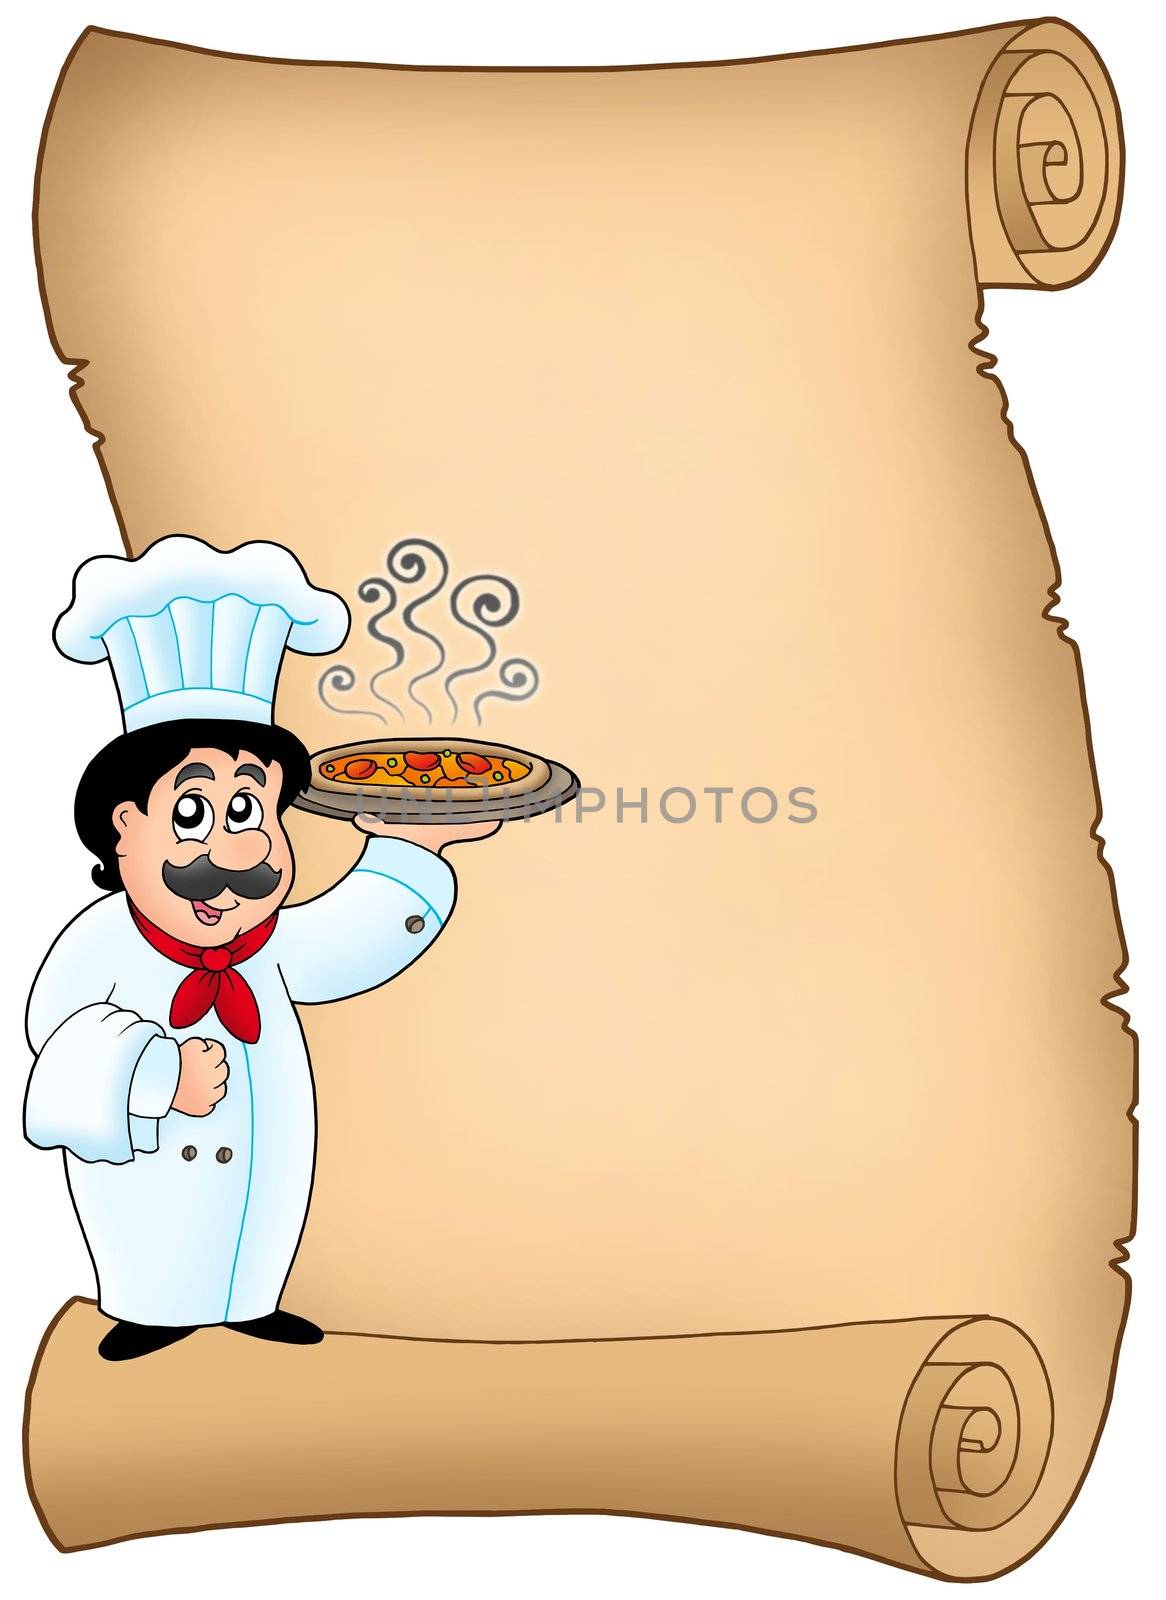 Scroll with chef holding pizza - color illustration.